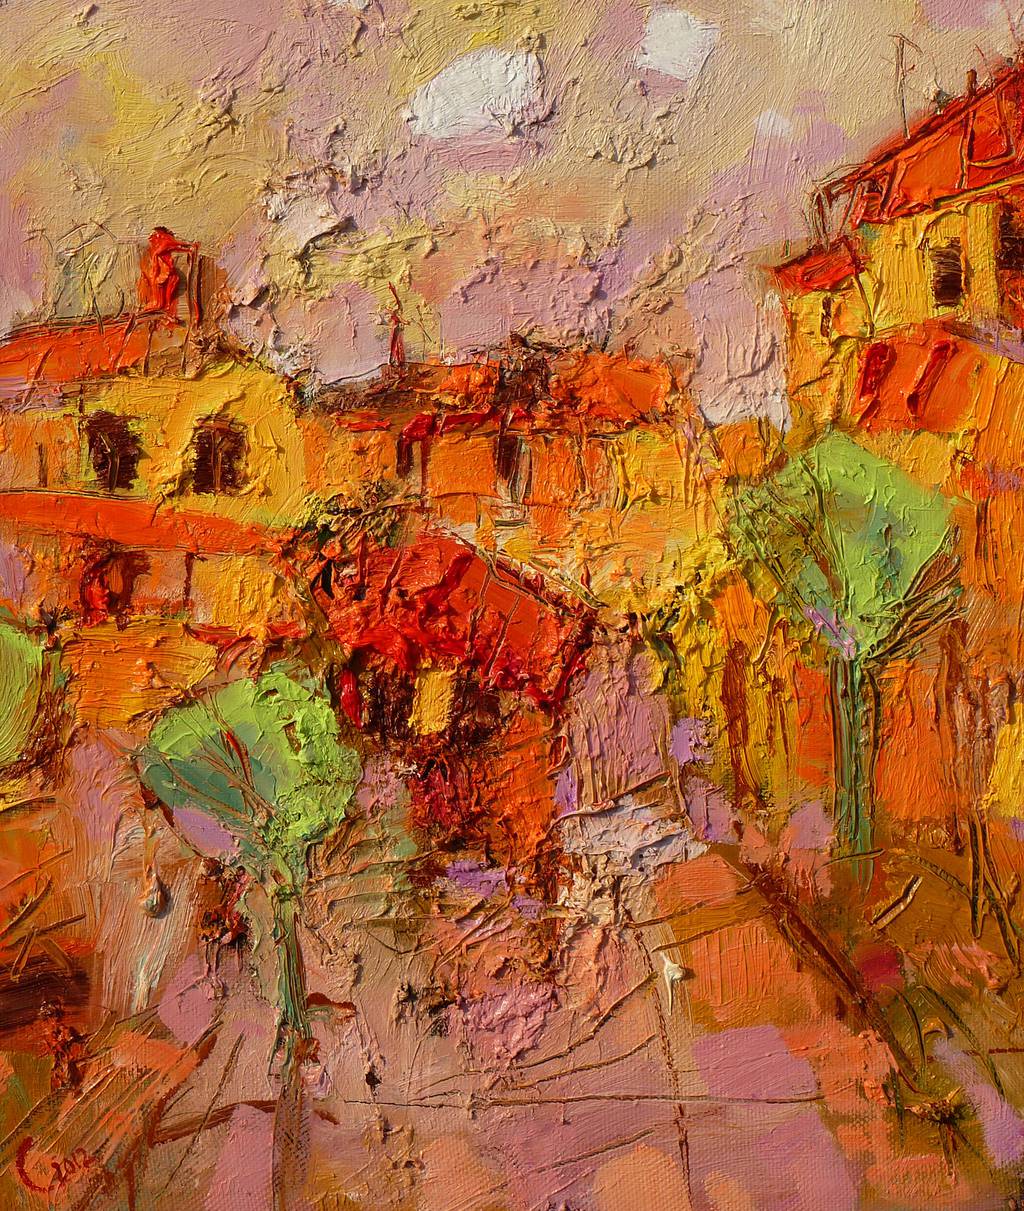 Summer in the City, 61x51cm., oil on canvas, 2015